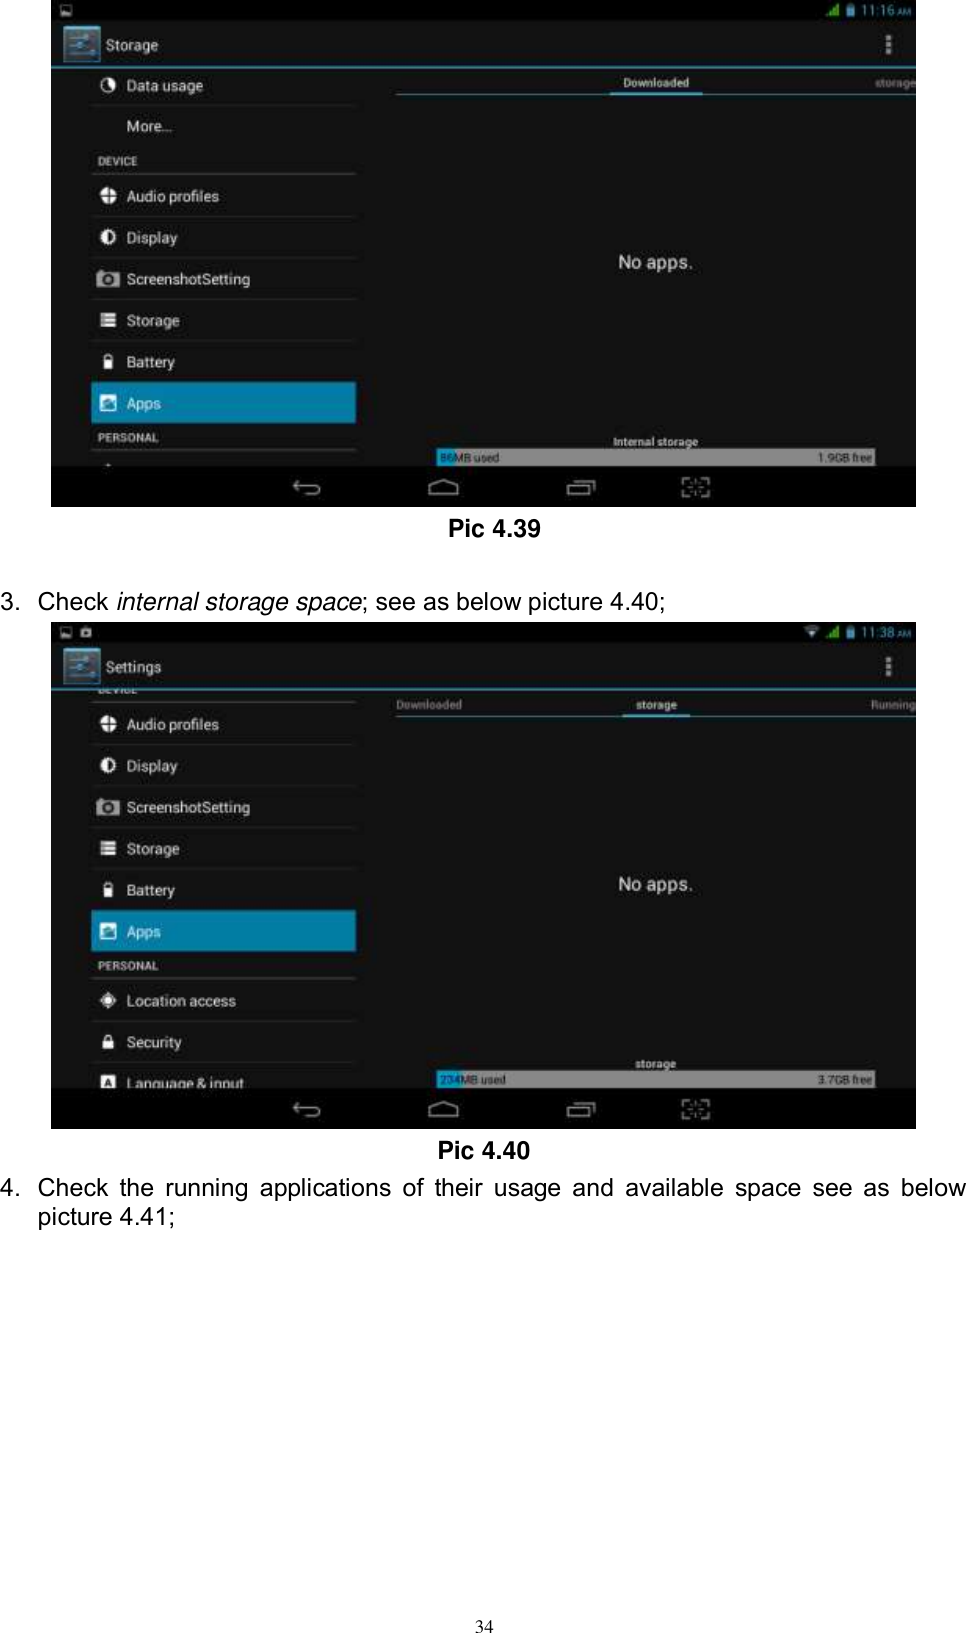      34  Pic 4.39  3.  Check internal storage space; see as below picture 4.40;  Pic 4.40 4.  Check  the  running  applications  of  their  usage  and  available  space see as below picture 4.41; 